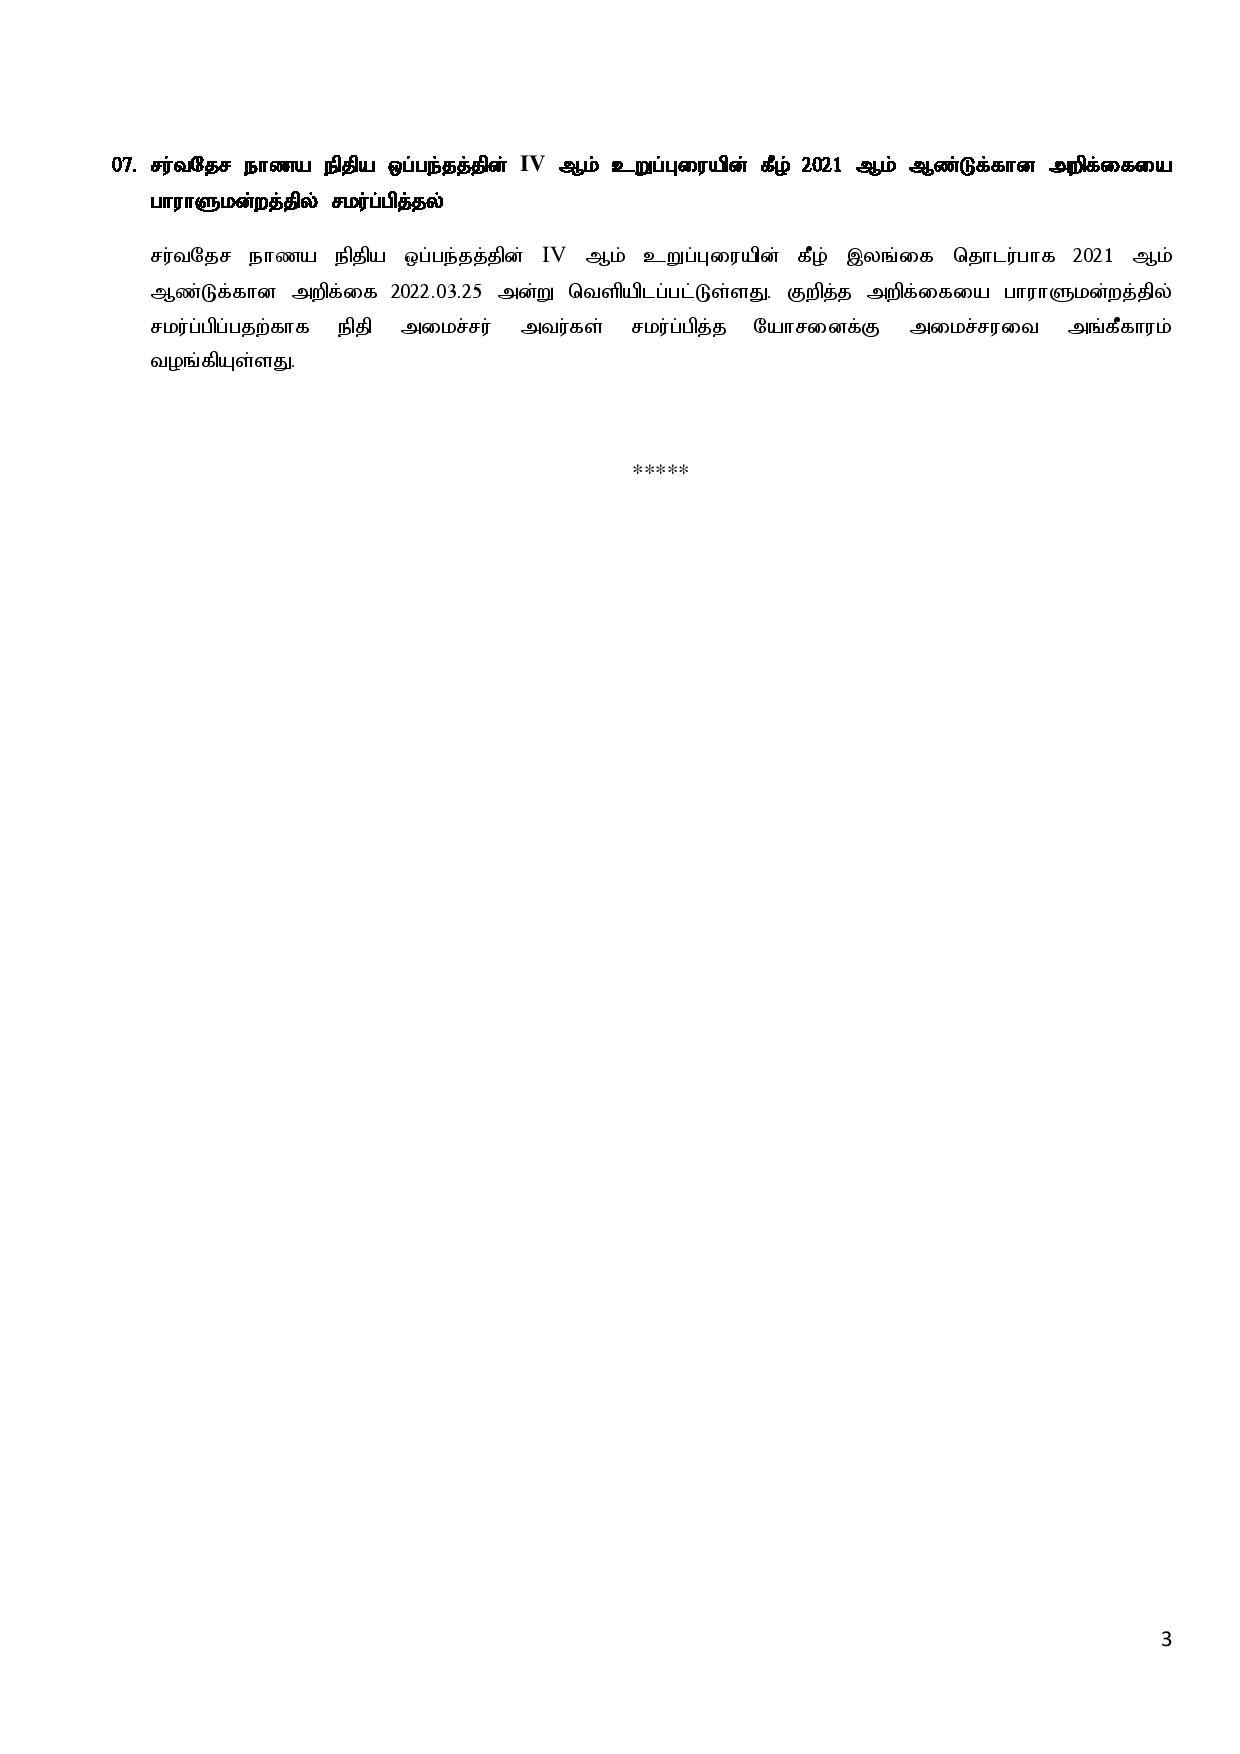 Cabinet Decisions on 28.03.2022 Tamil page 003